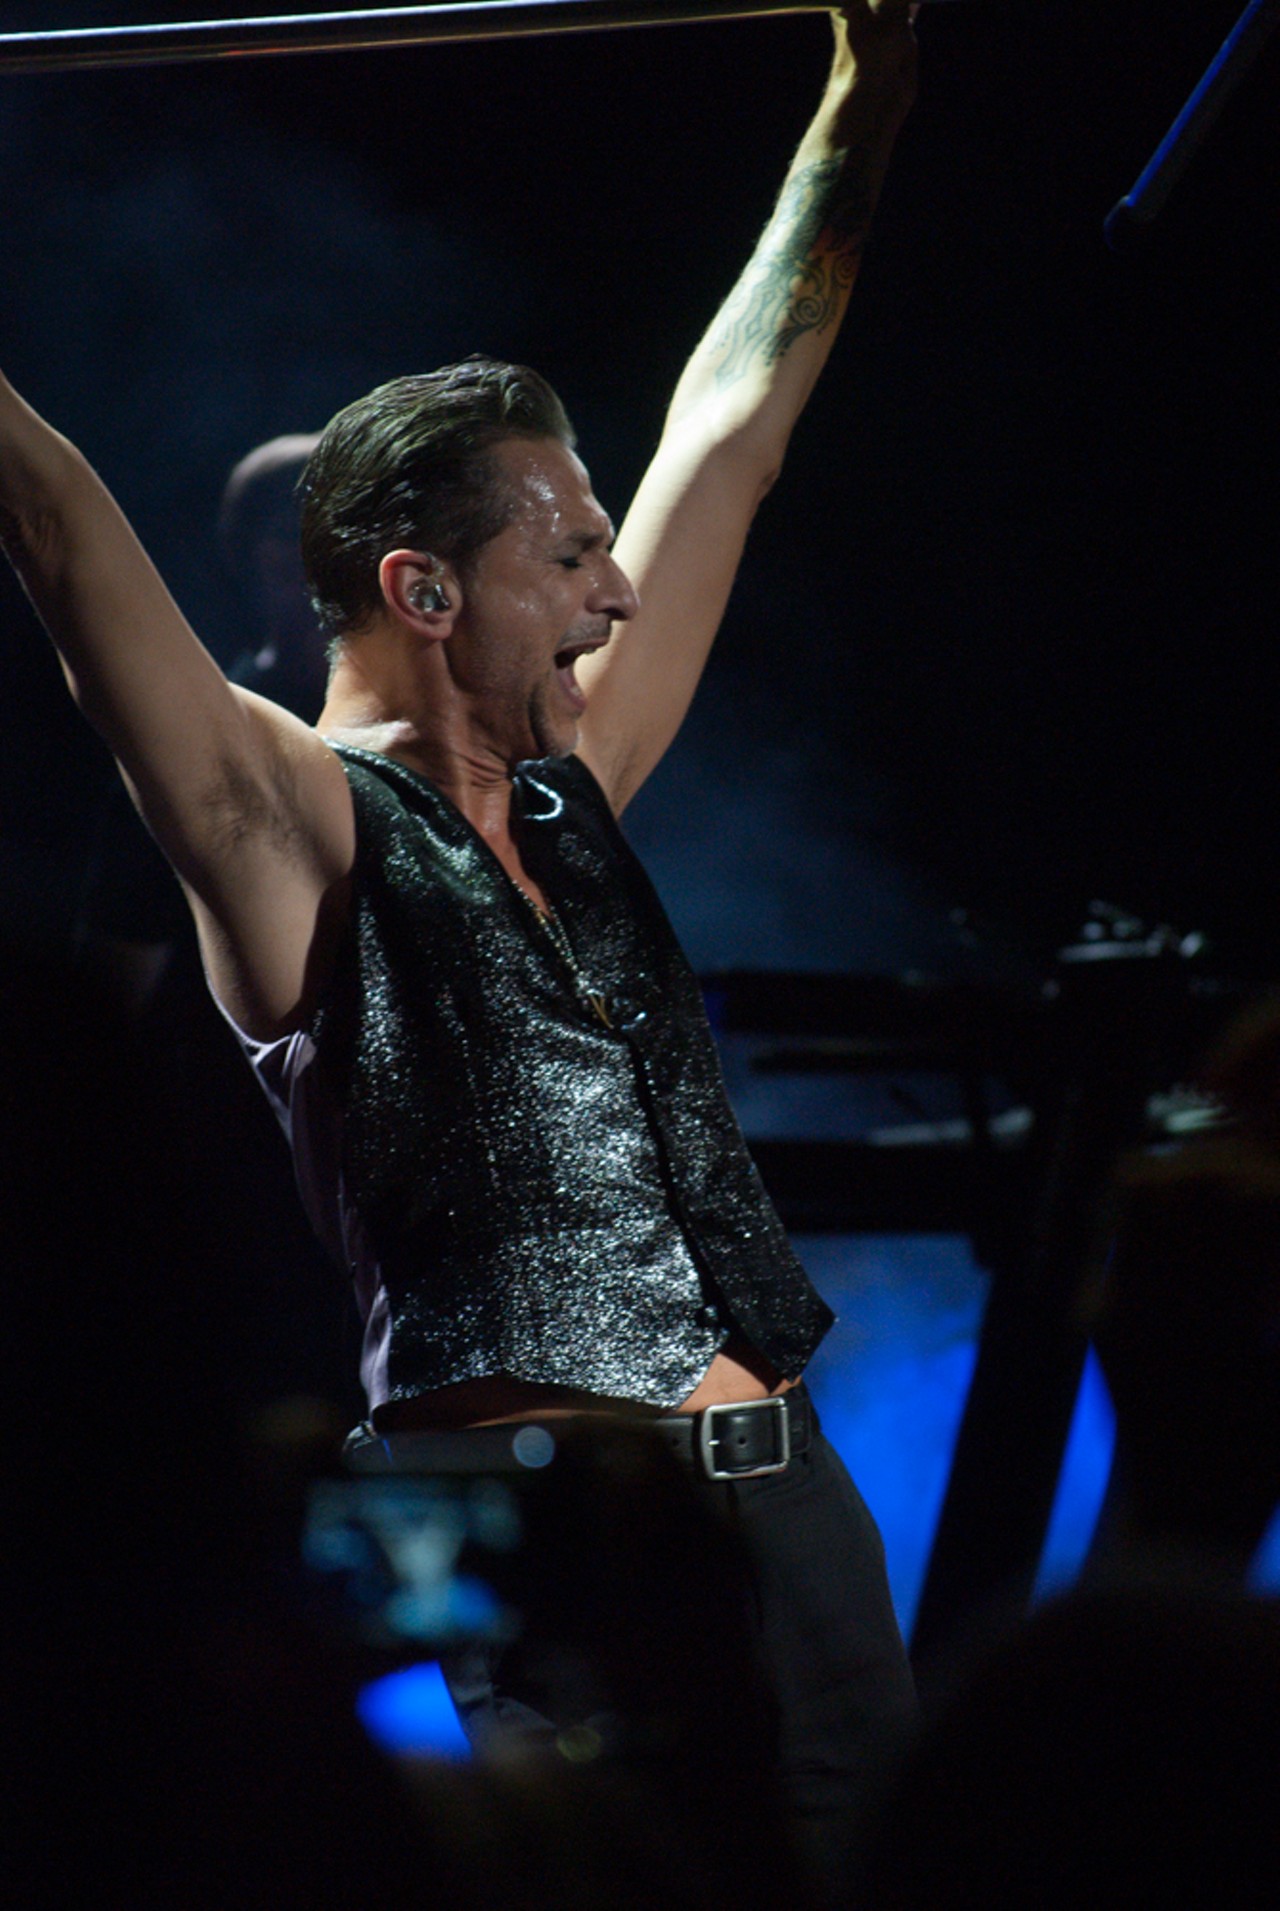 20 Photos From Depeche Mode's First North American Tour Date